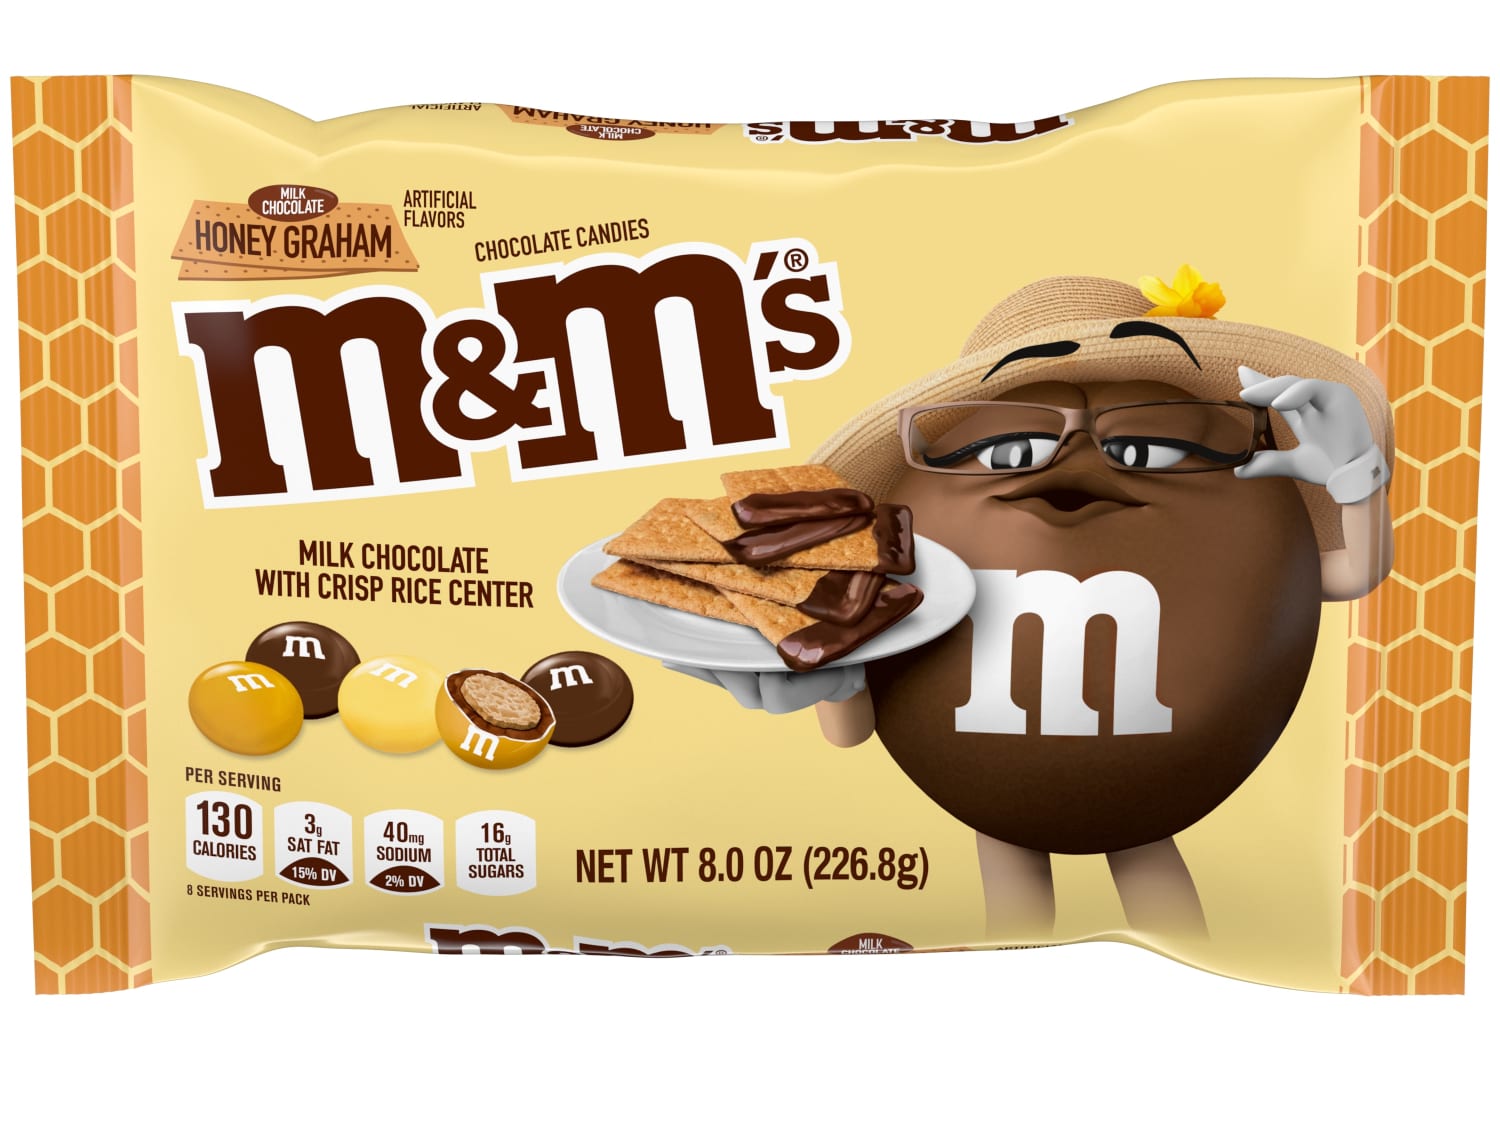 M&M's Is Releasing Mix Packs With 3 Different Flavors In Each Bag